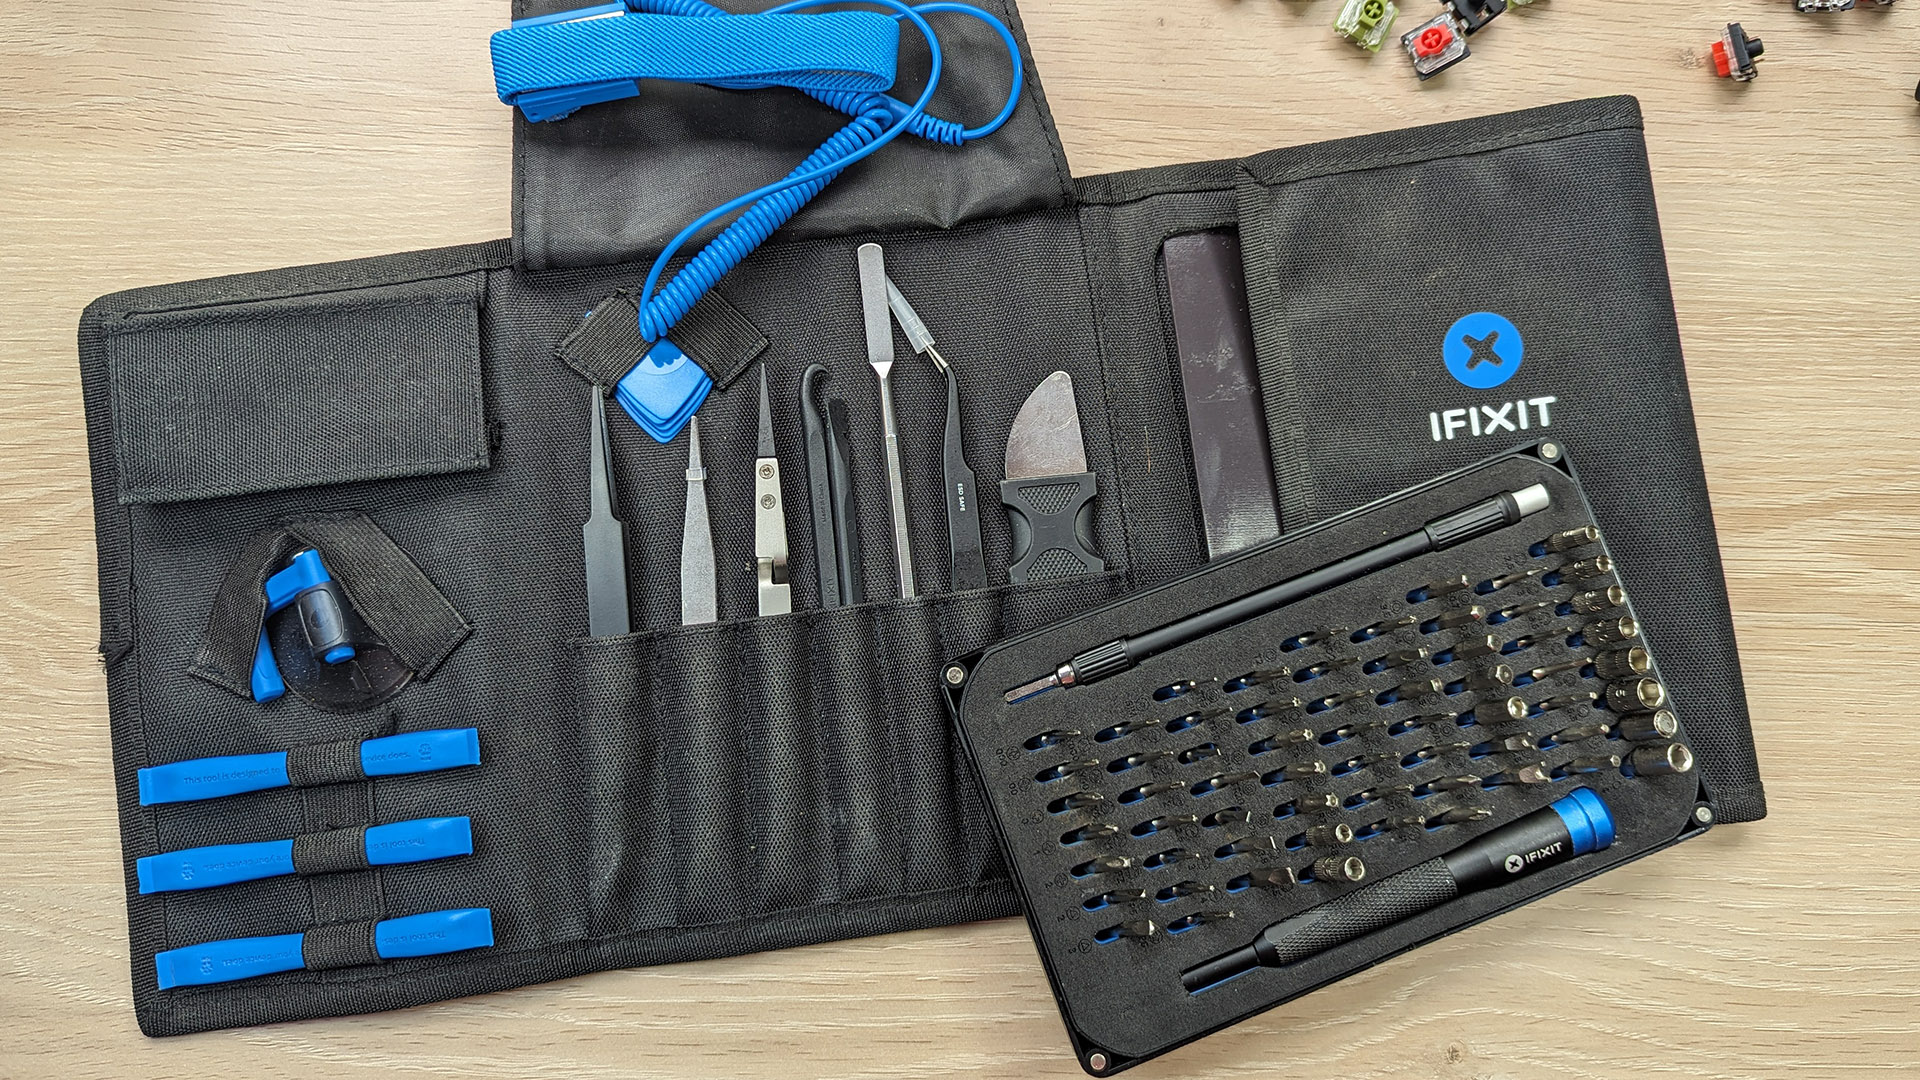 My favorite electronics tool kit from iFixit is 20% off